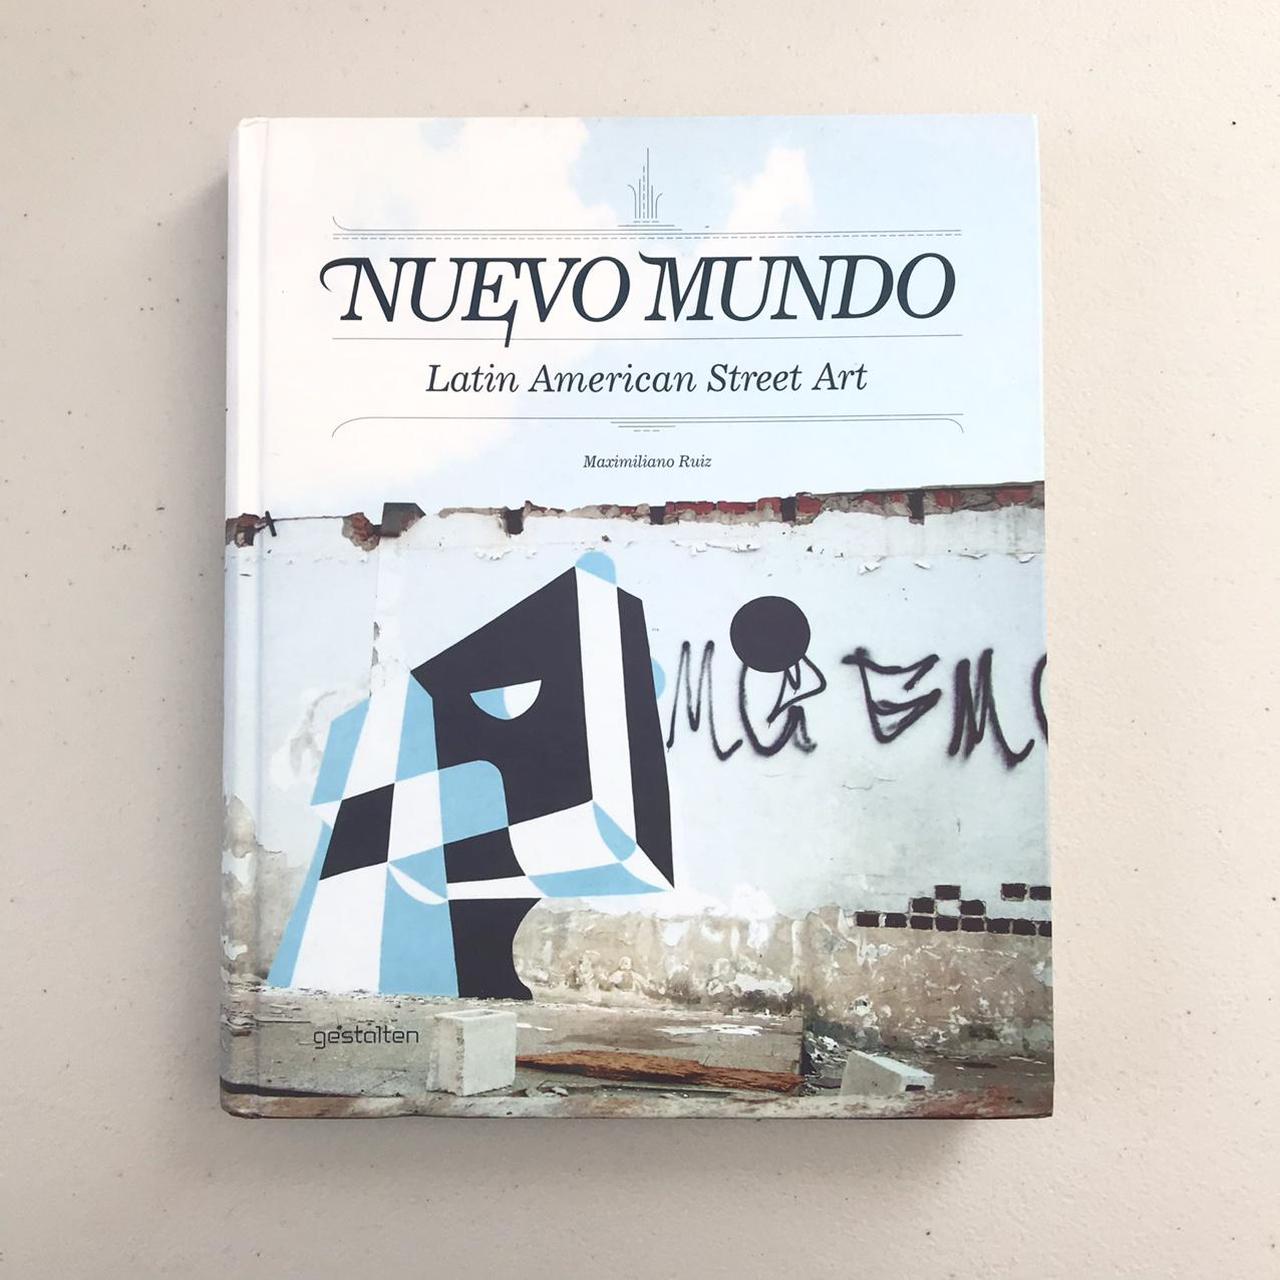 Product Image 1 - "NUEVO MUNDO is the first